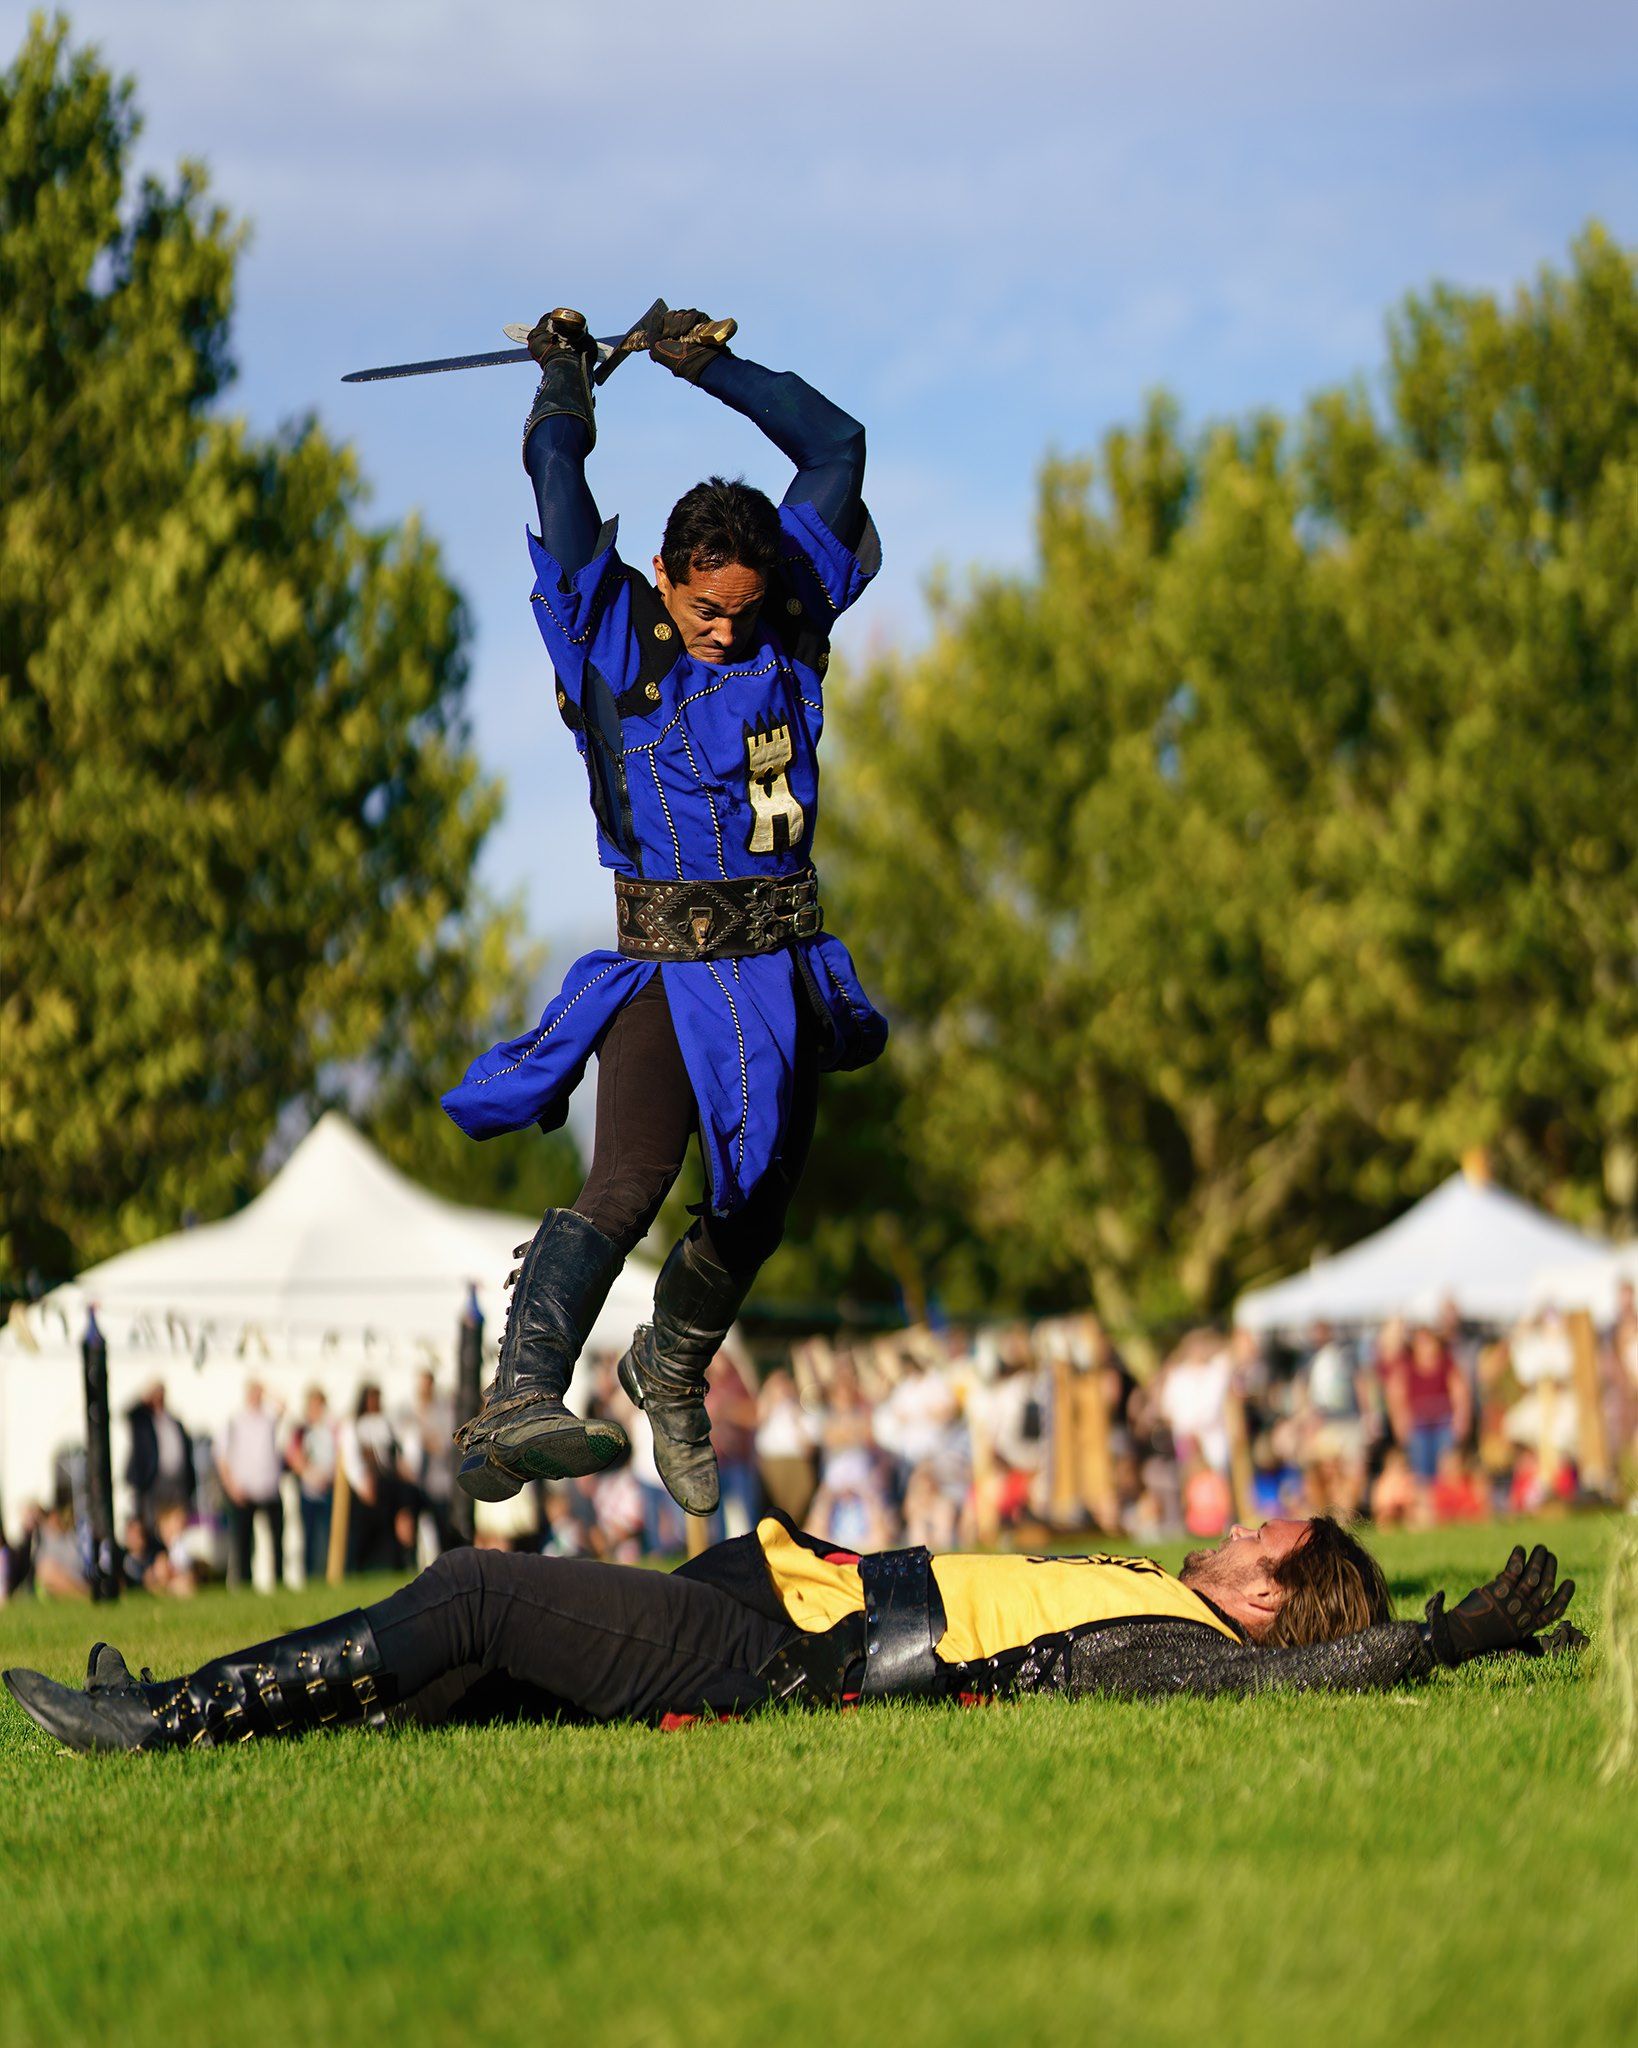 A man dressed as a medieval crusader leaps over another man while swinging a sword.